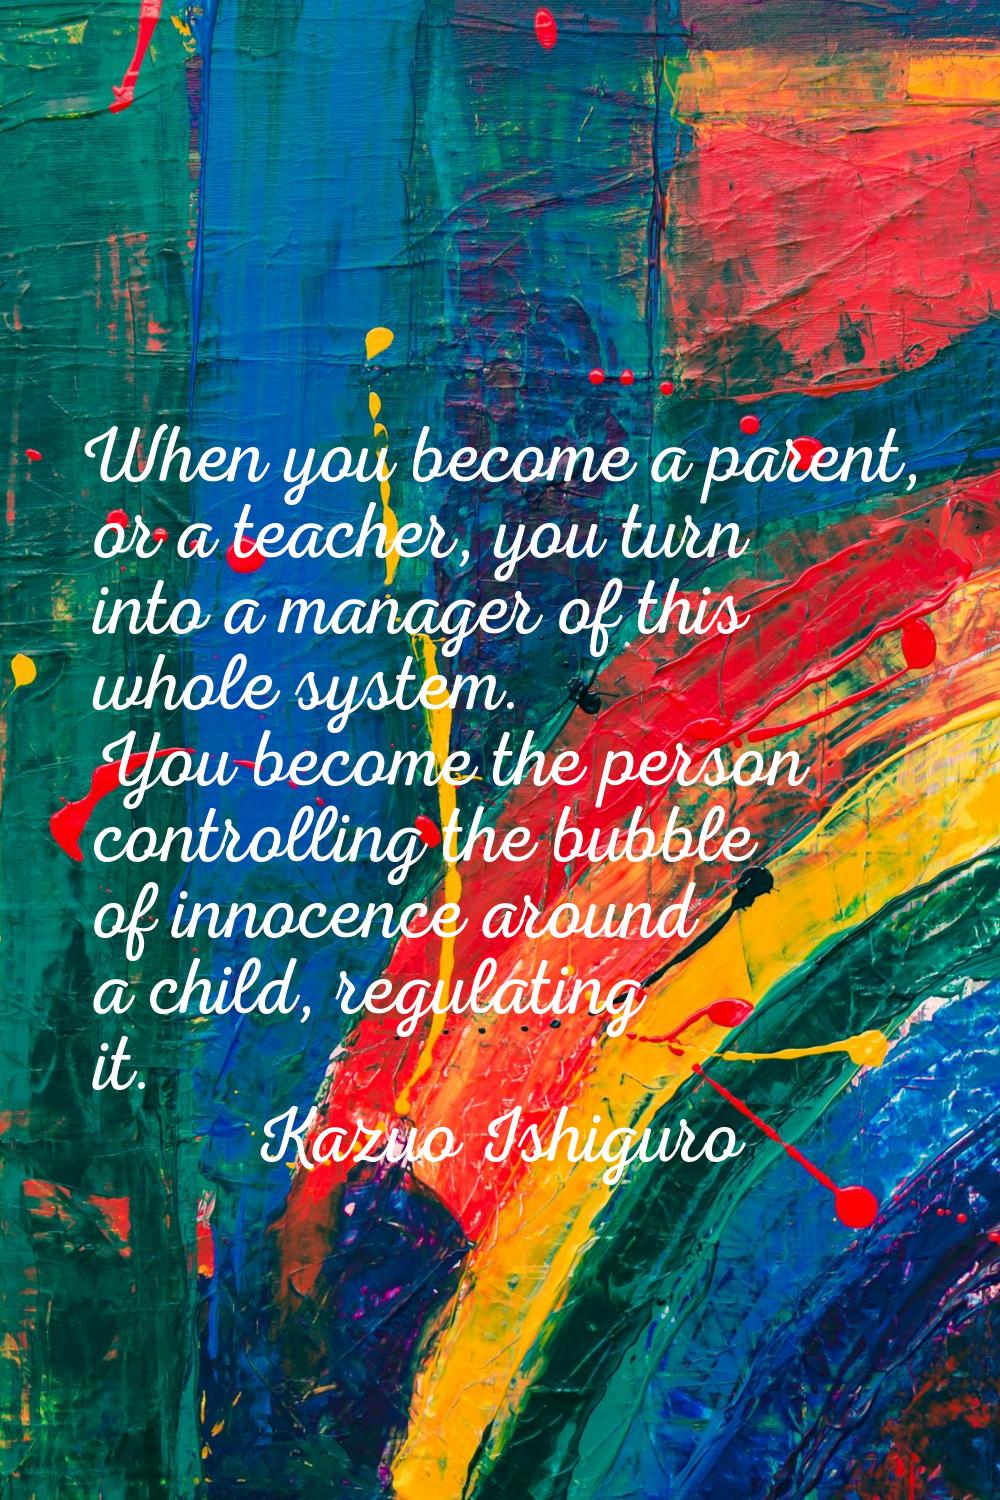 When you become a parent, or a teacher, you turn into a manager of this whole system. You become th